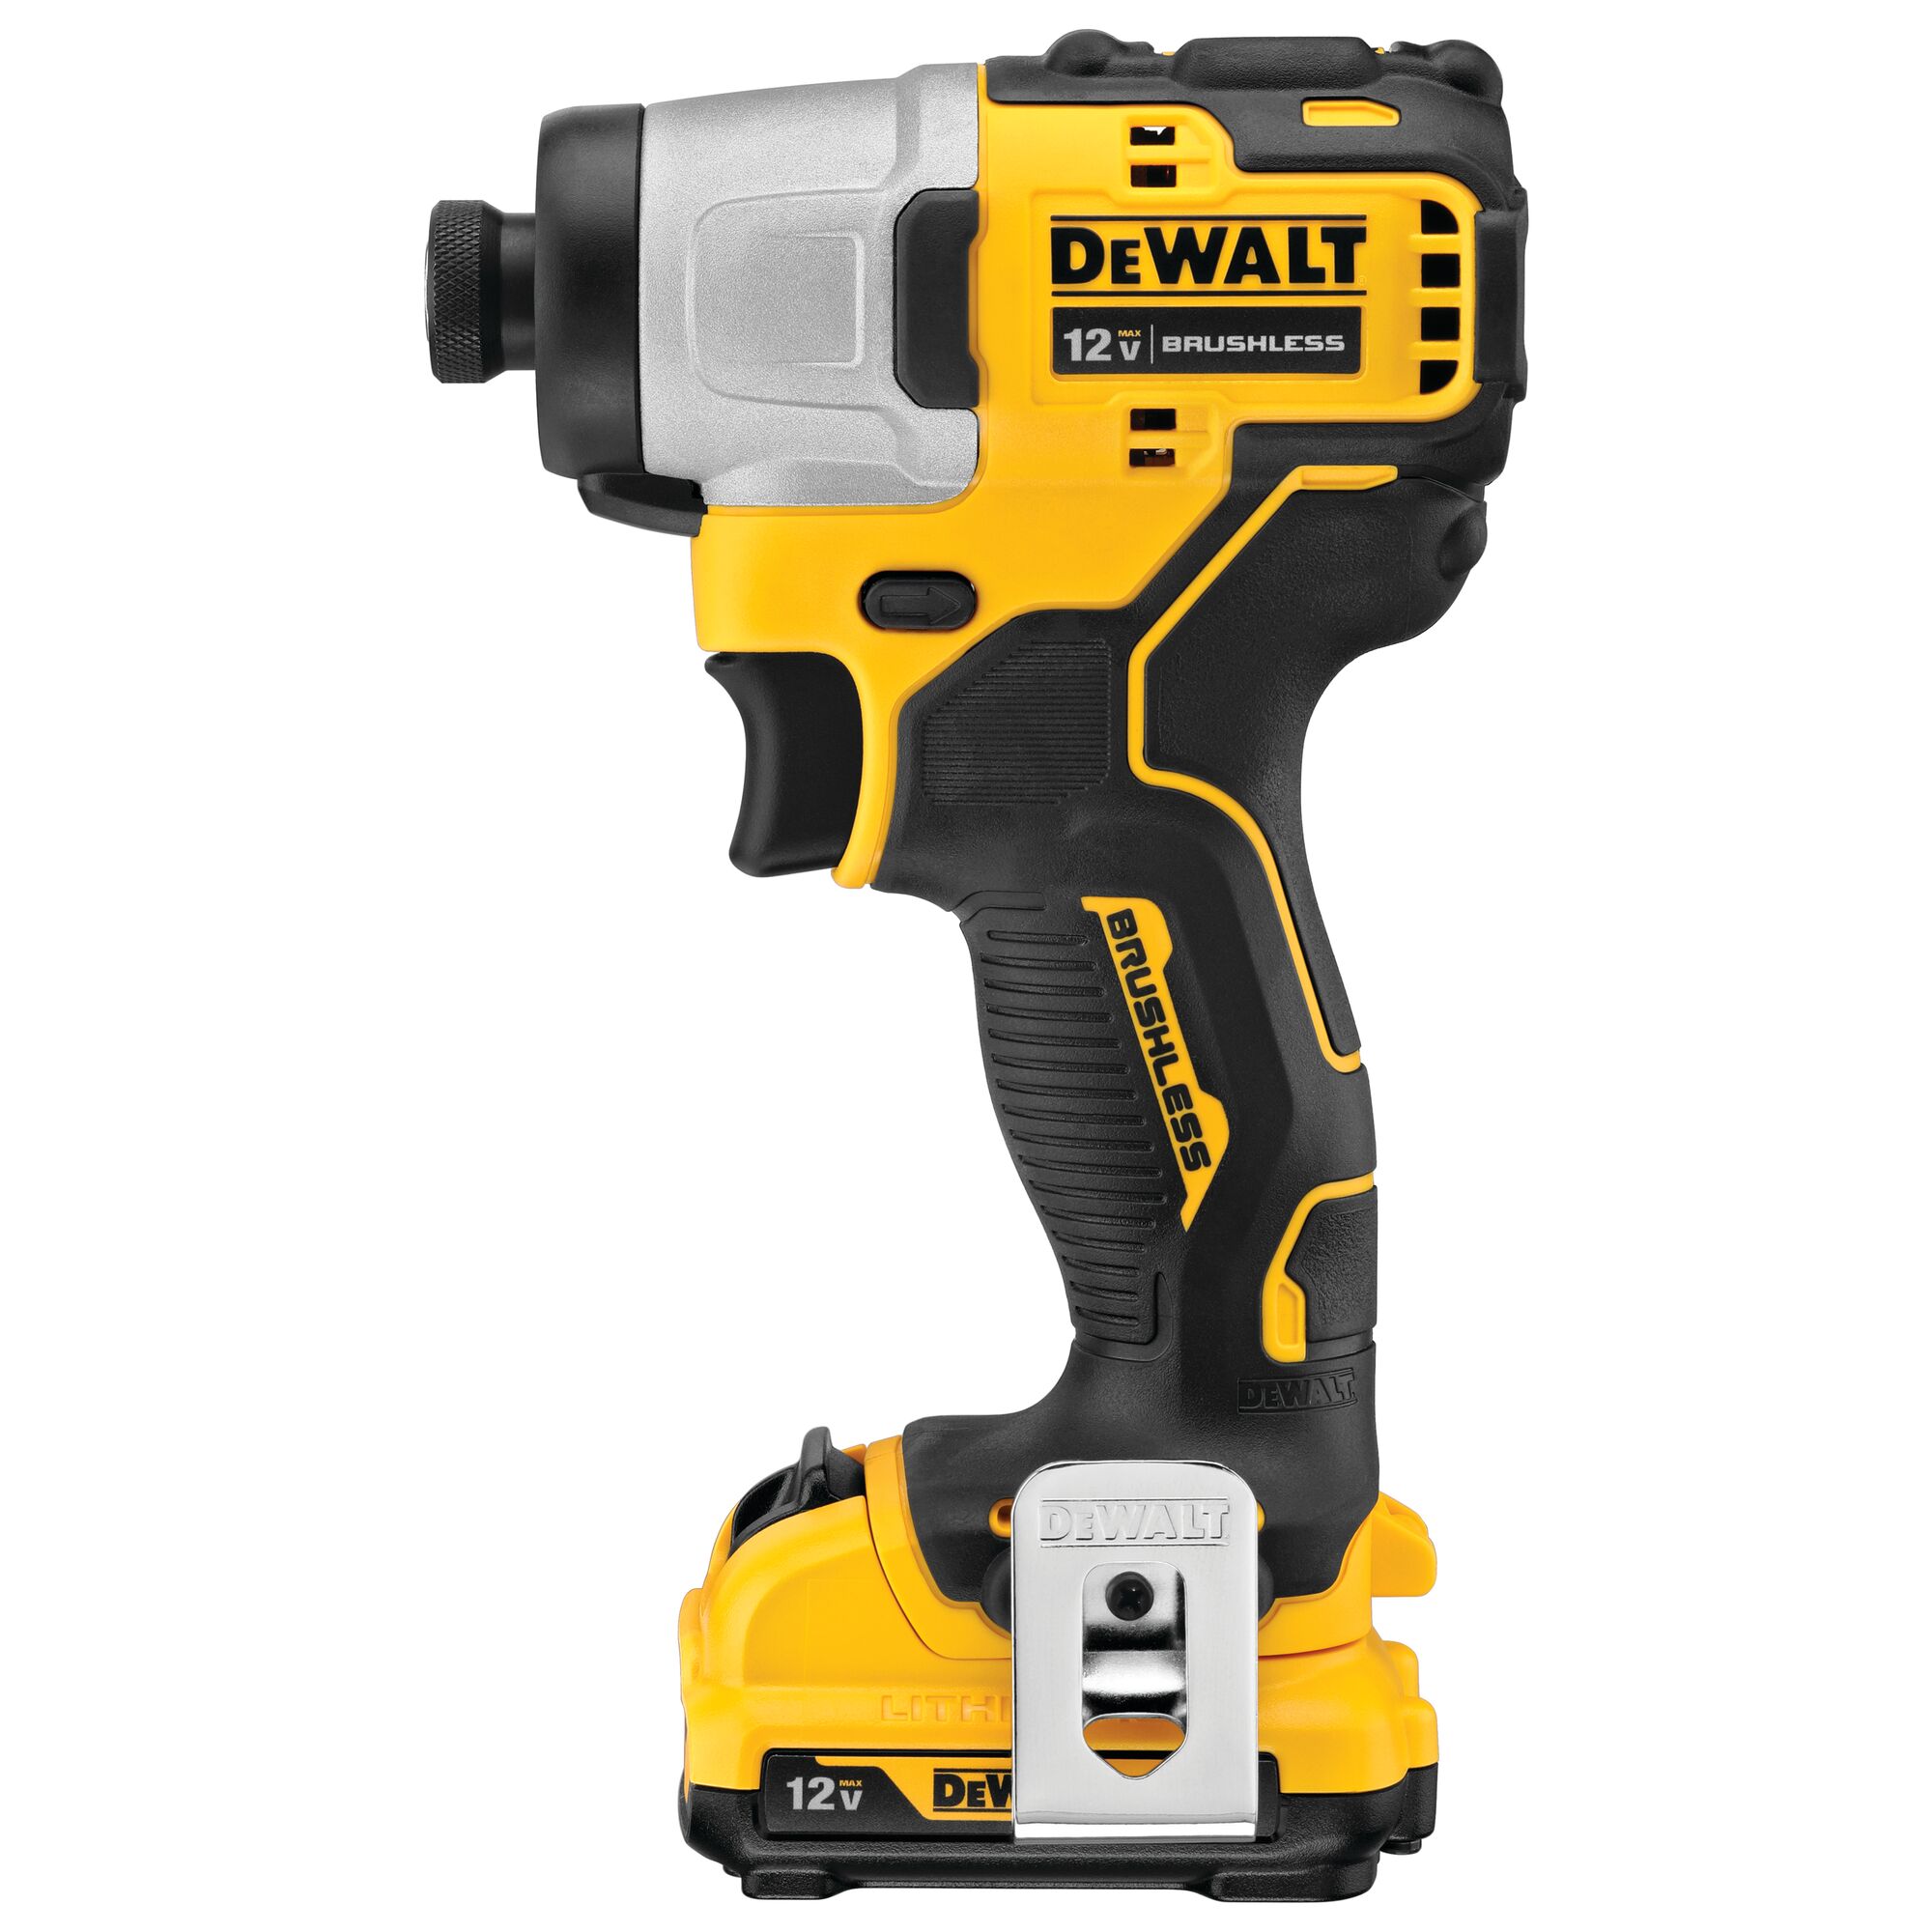 x2 for dewalt makita impact driver 12" 300mm Extra Long Magnetic Power Bit hold 